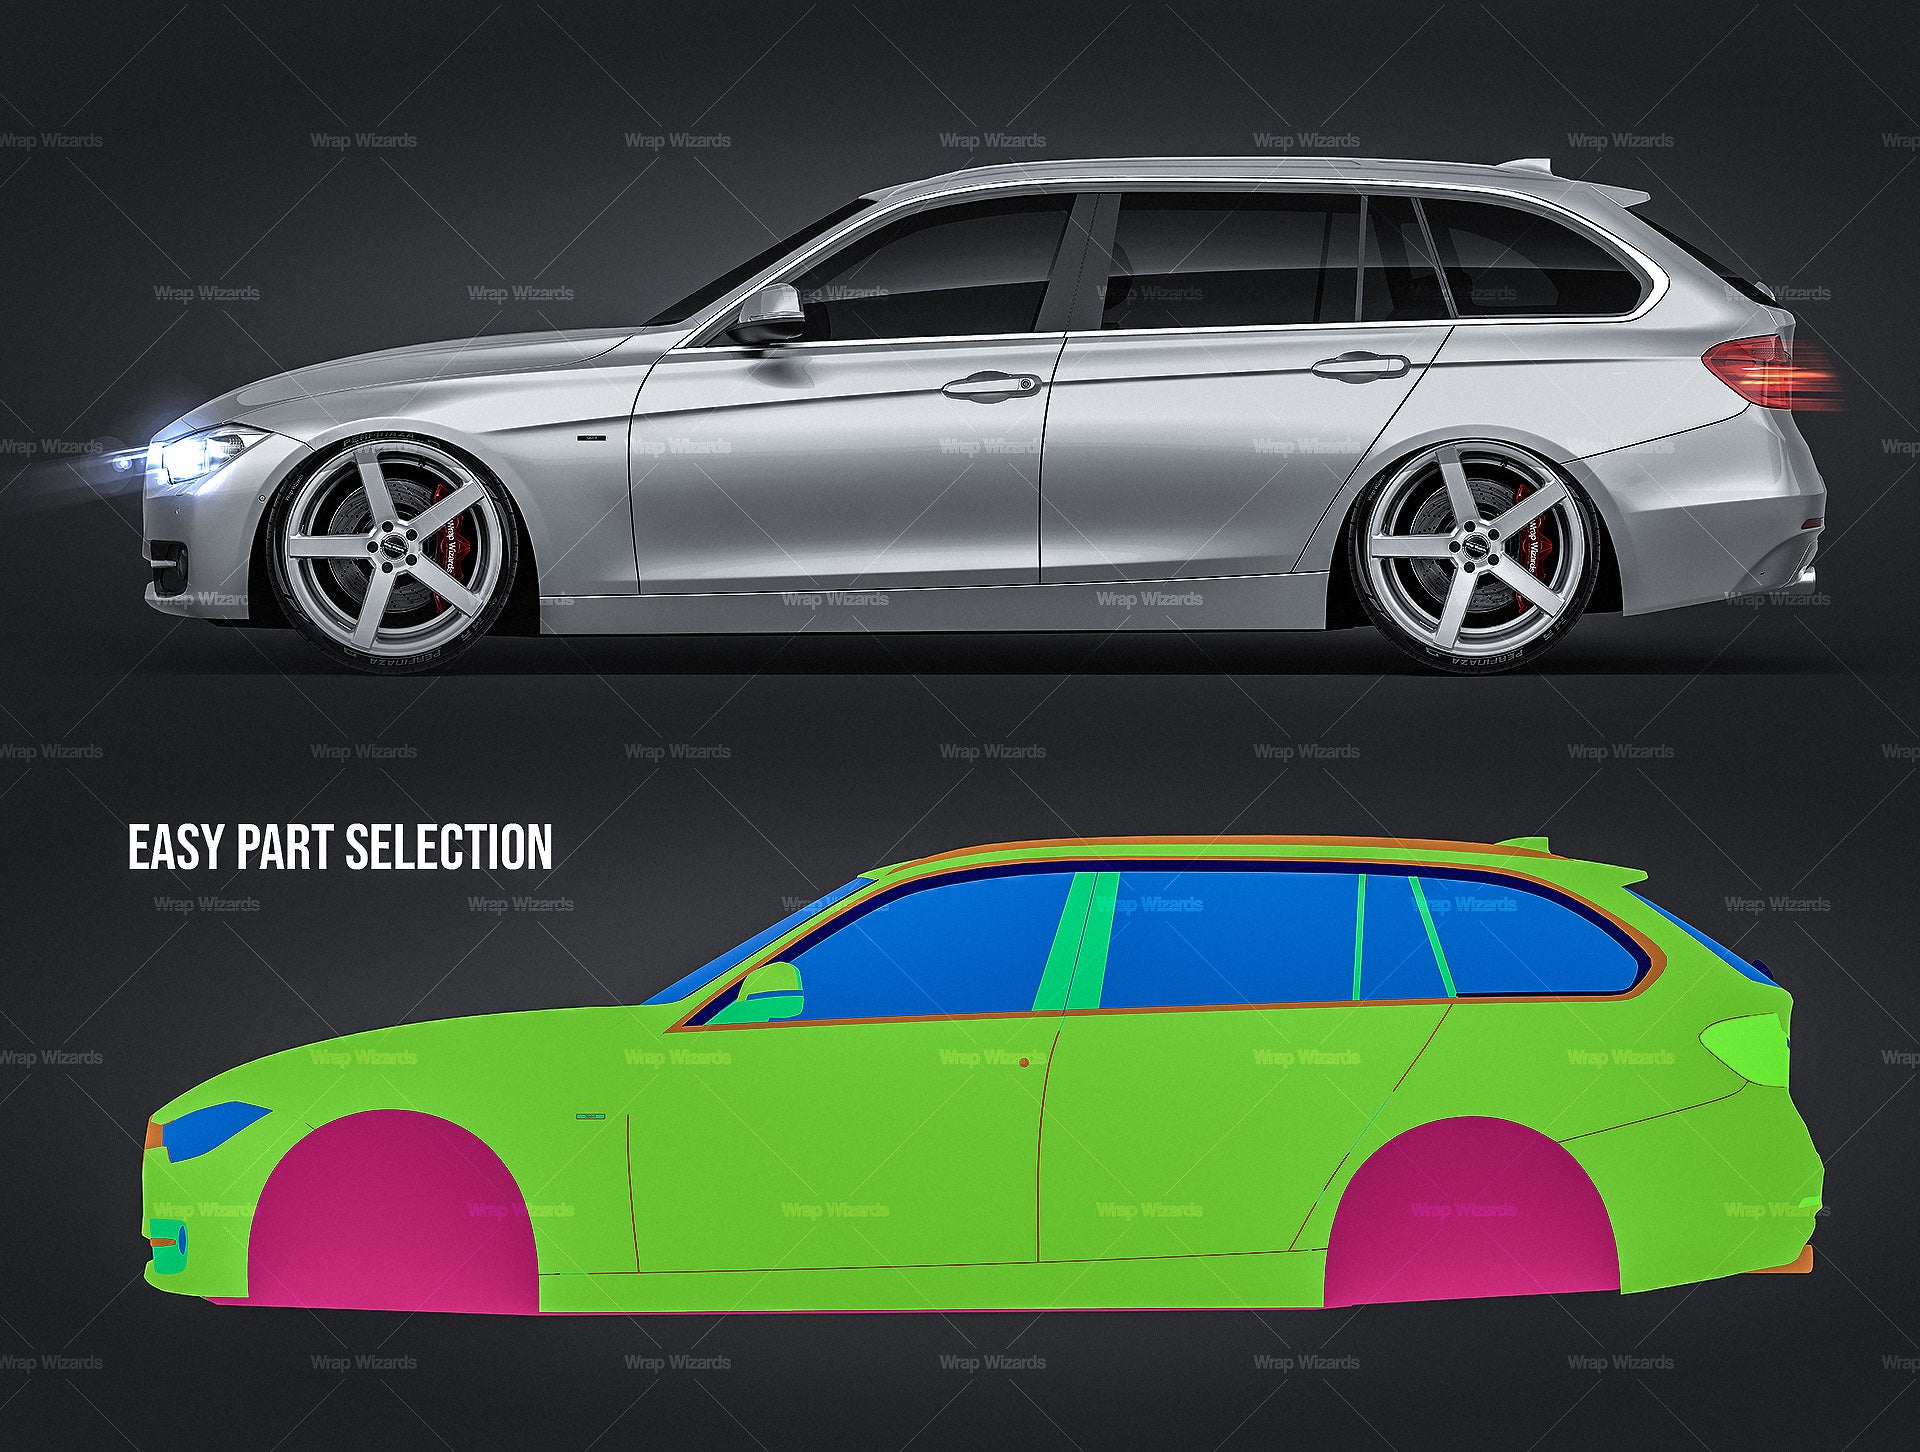 BMW F31 TOURING - 3 Series - Colour Vector File Download - .PDF, .Svg, .Png